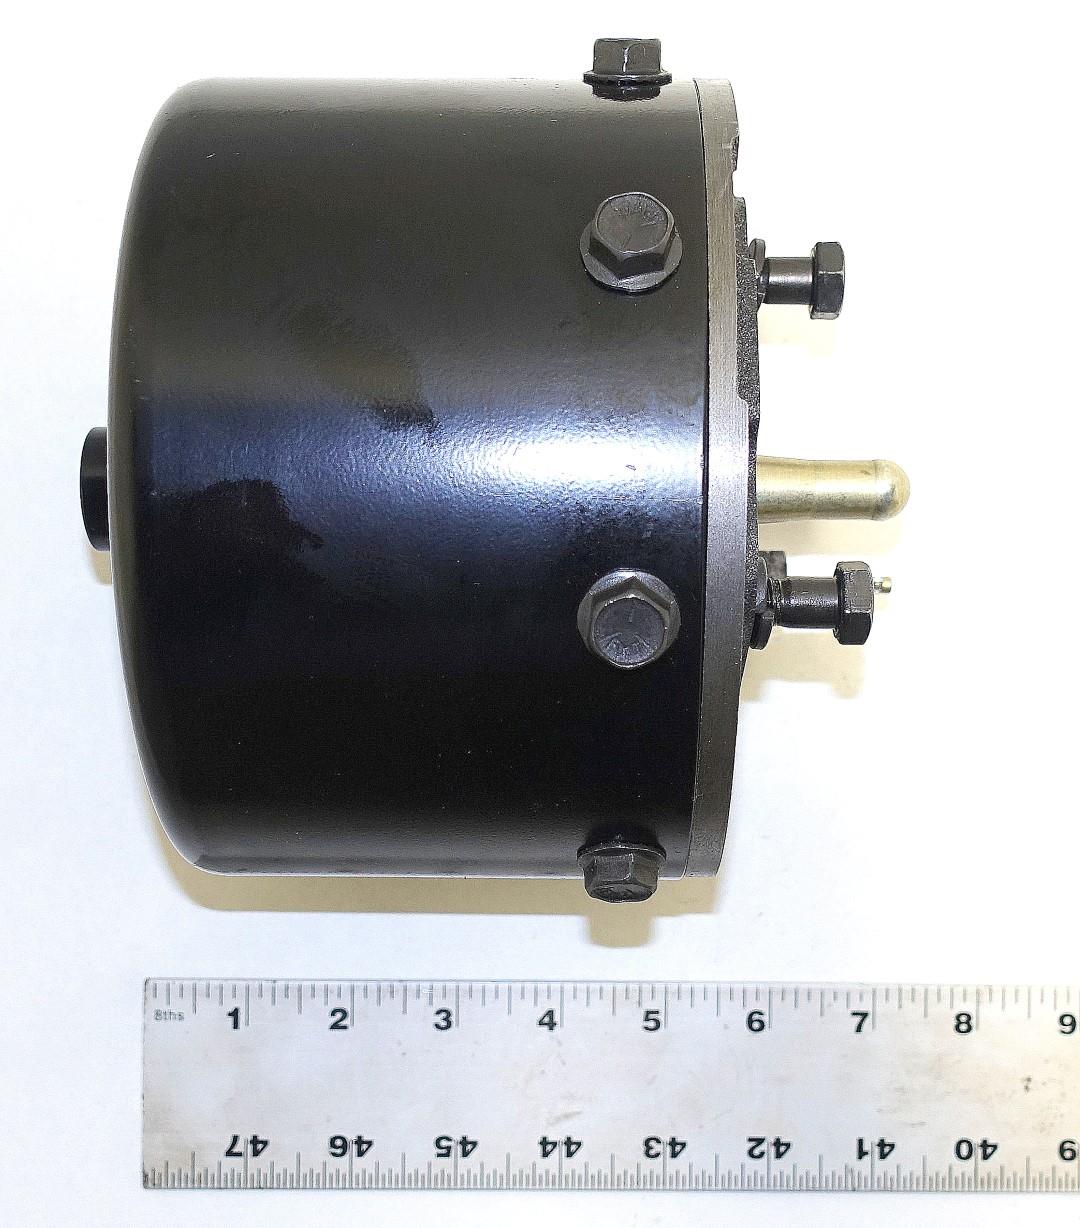 SP-2044 | 2530-00-630-0058 Hydraulic Air Brake Chamber for Case Model W24B Loader NOS (3) (Large).JPG